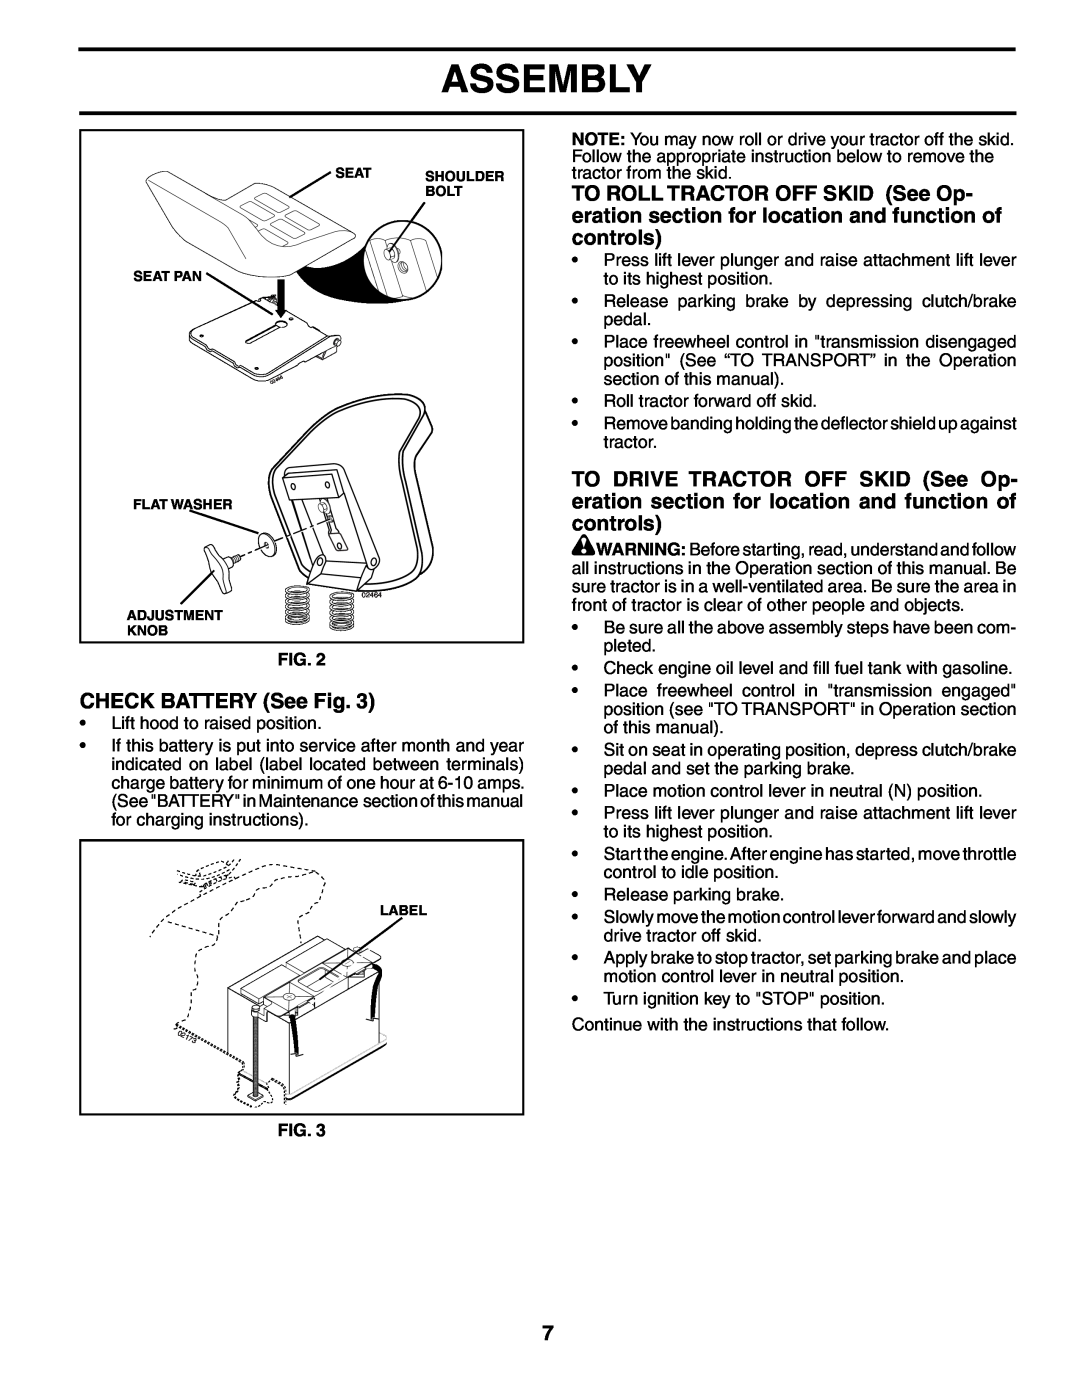 Poulan 196085 manual CHECK BATTERY See Fig, Assembly 